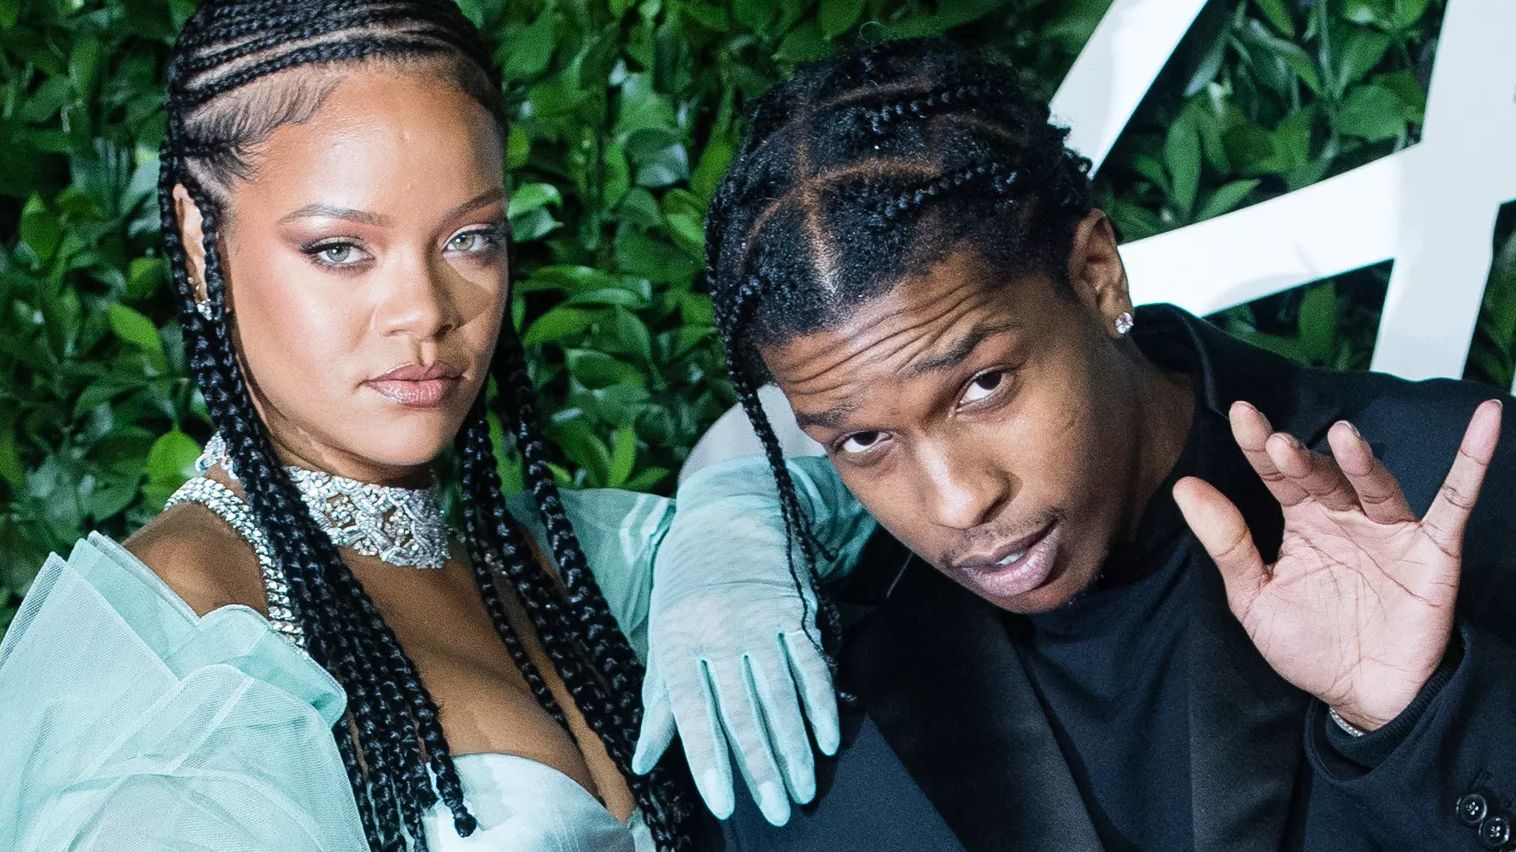 Rihanna Skincare Interview with ASAP Rocky